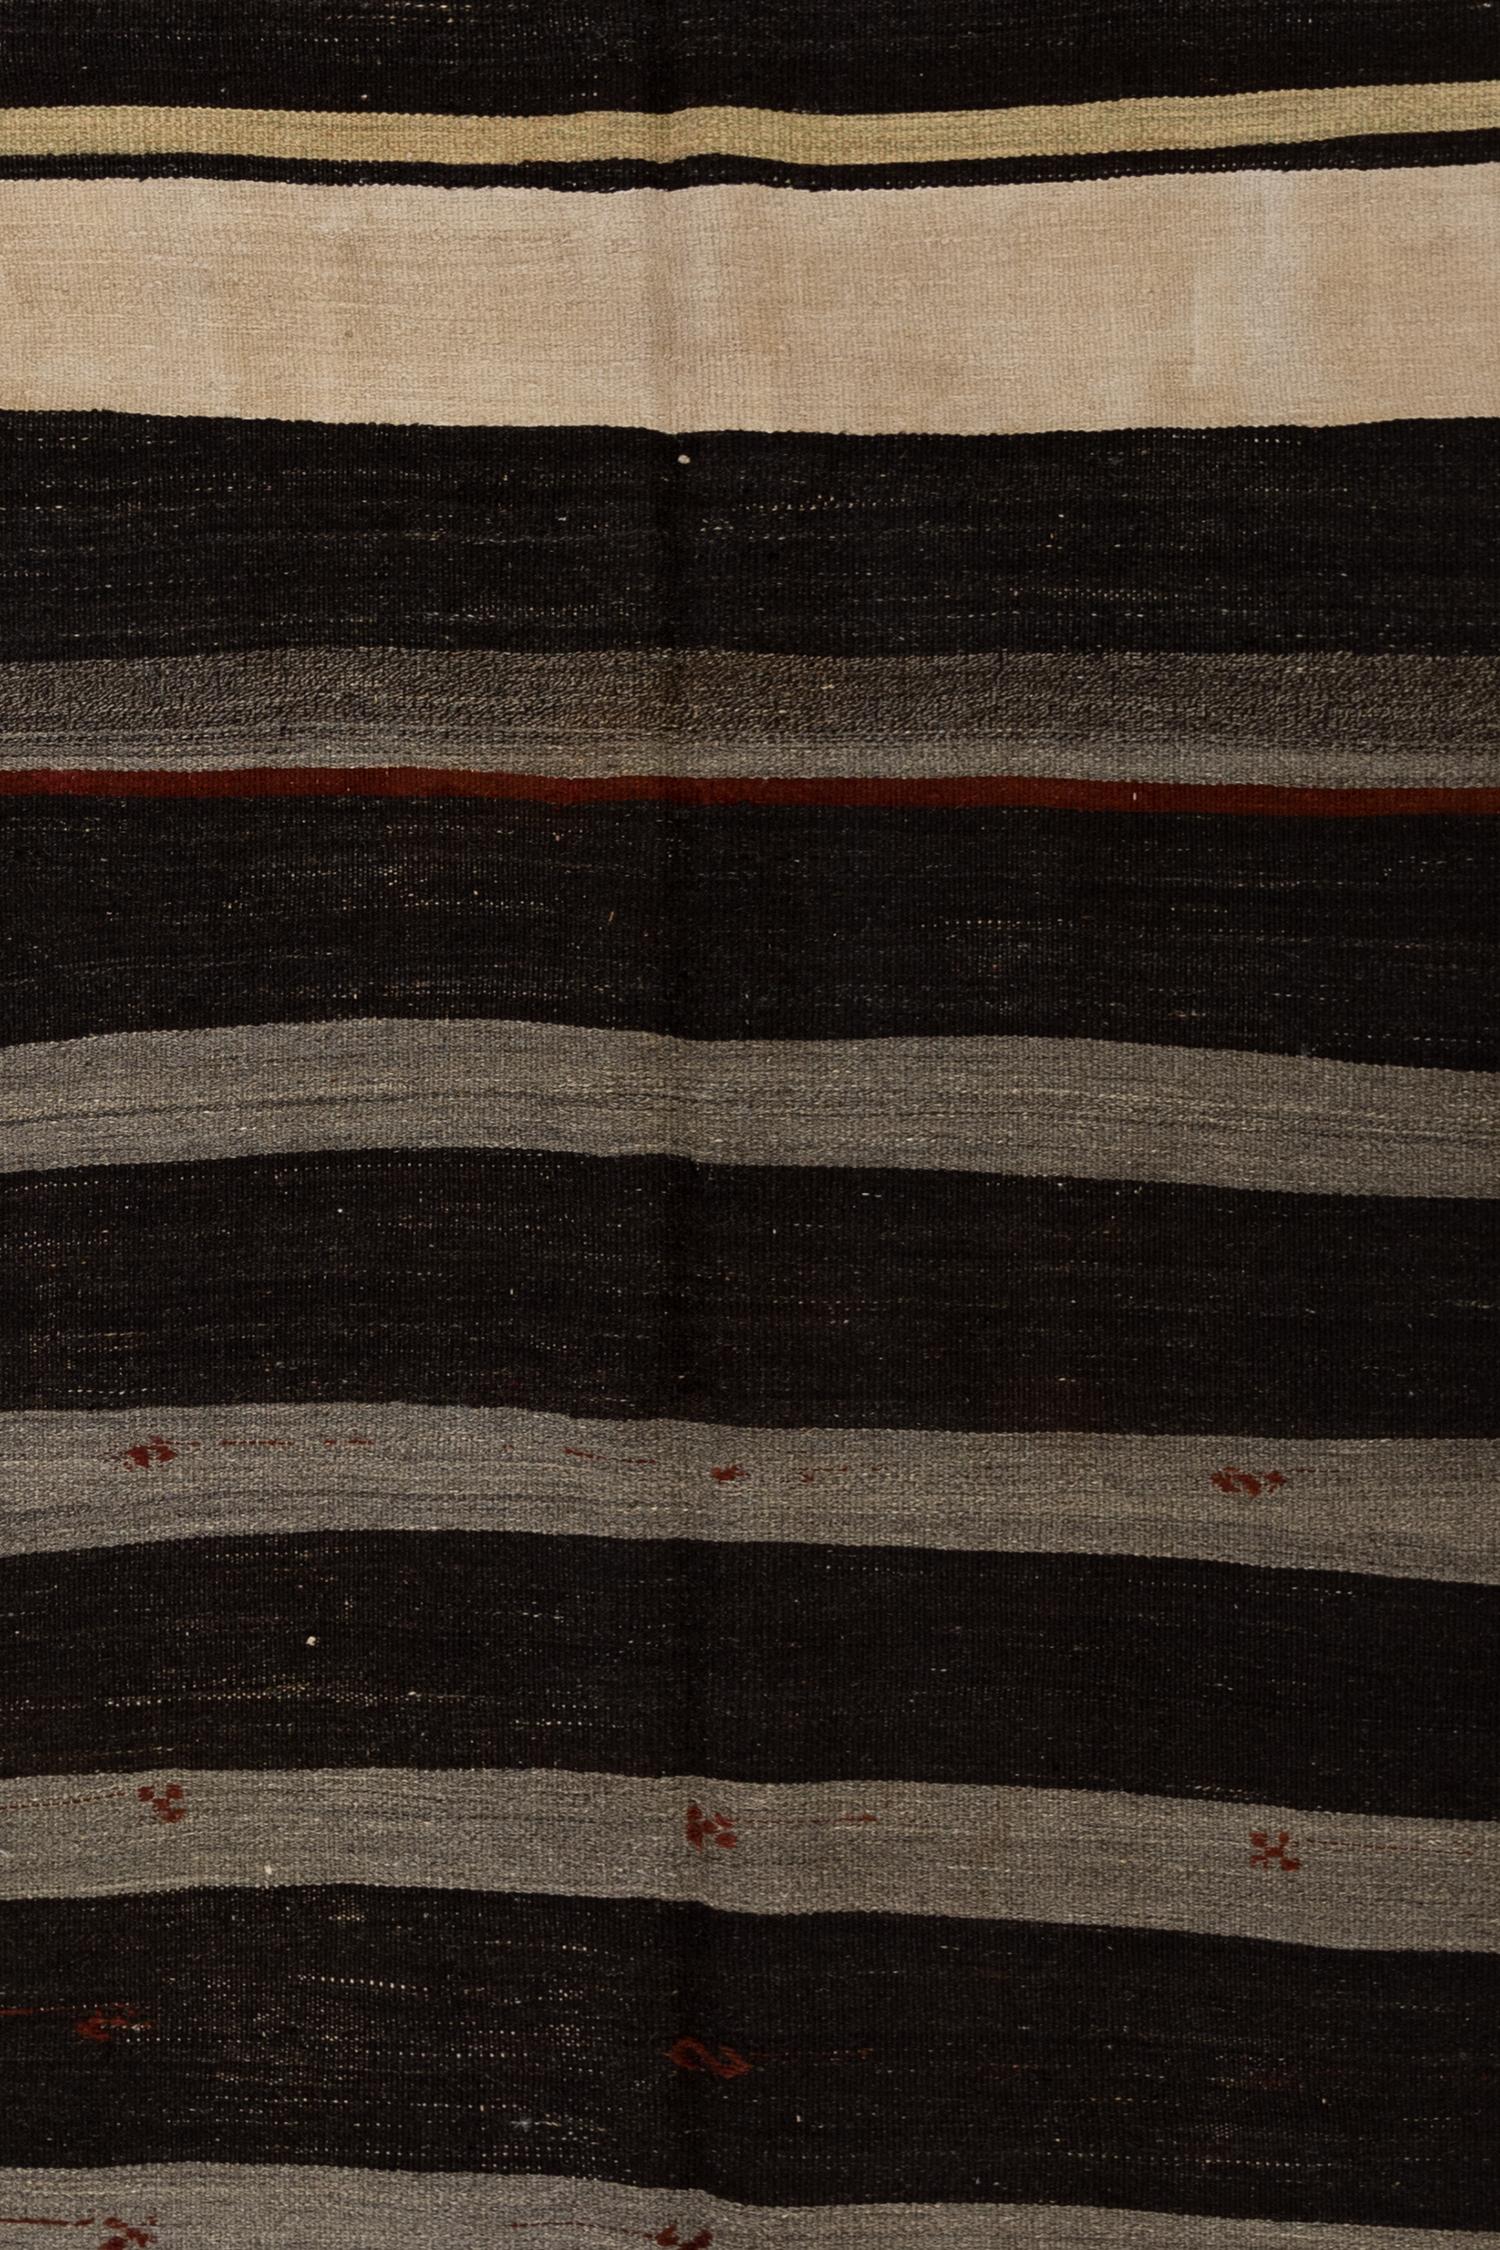 Age: Circa 1950

Colors: Washed black, alabaster, stone gray, sandstone, burgundy. 

Pile: Flatweave

Wear Notes: 2

Material: Hemp, wool.

Moody traditional striped hemp Kilim. The inclusion of ribbon and evil eye symbols are said to represent good